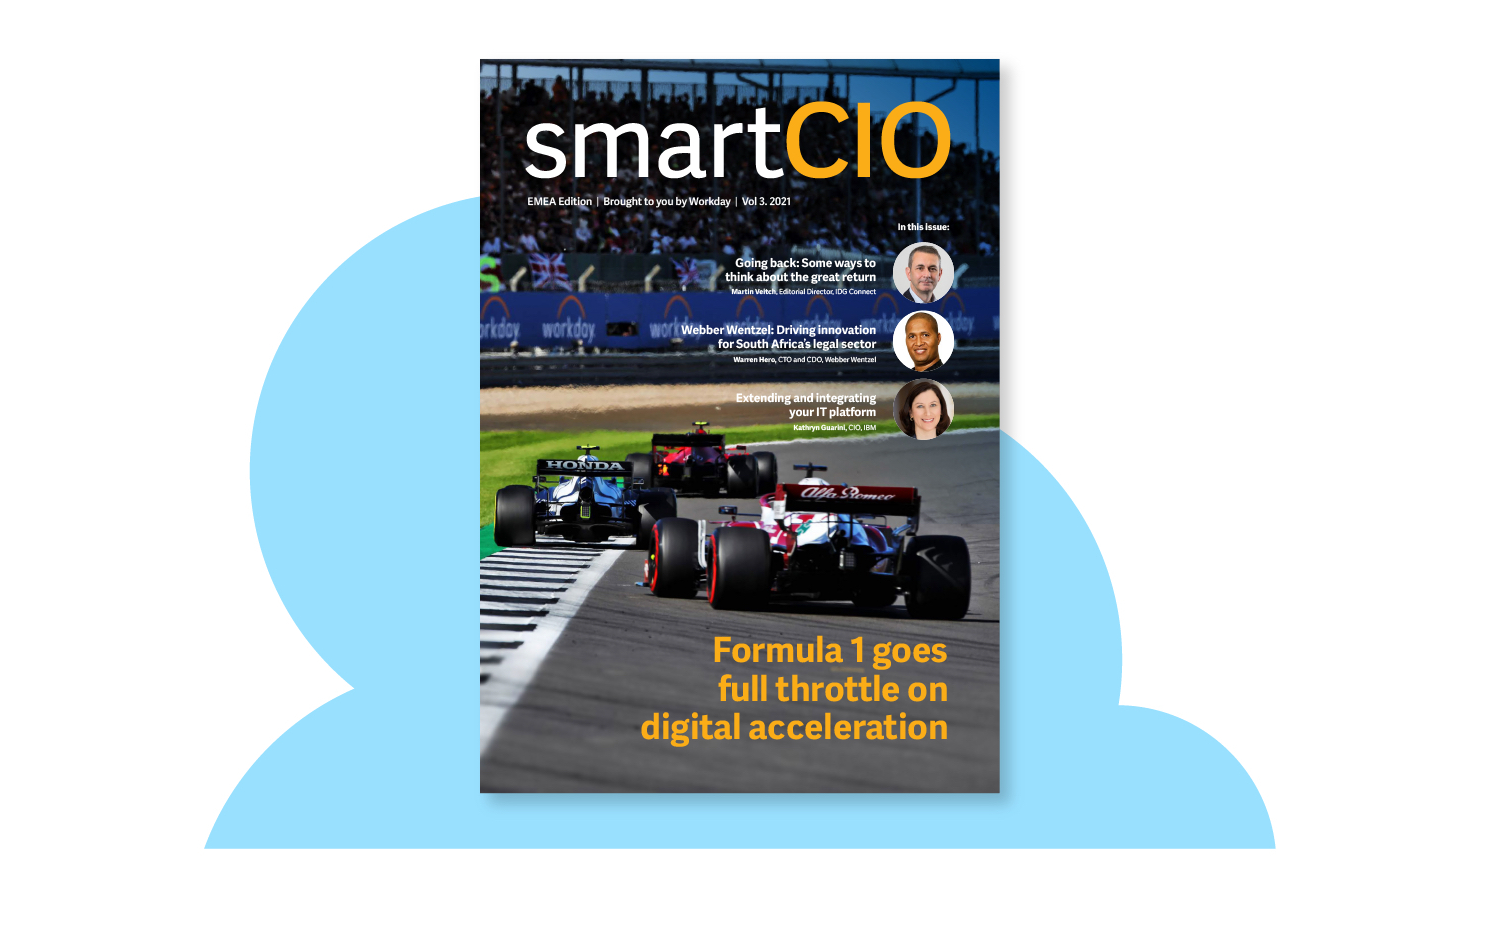 Illustration of three people looking at the latest edition of smartCIO magazine